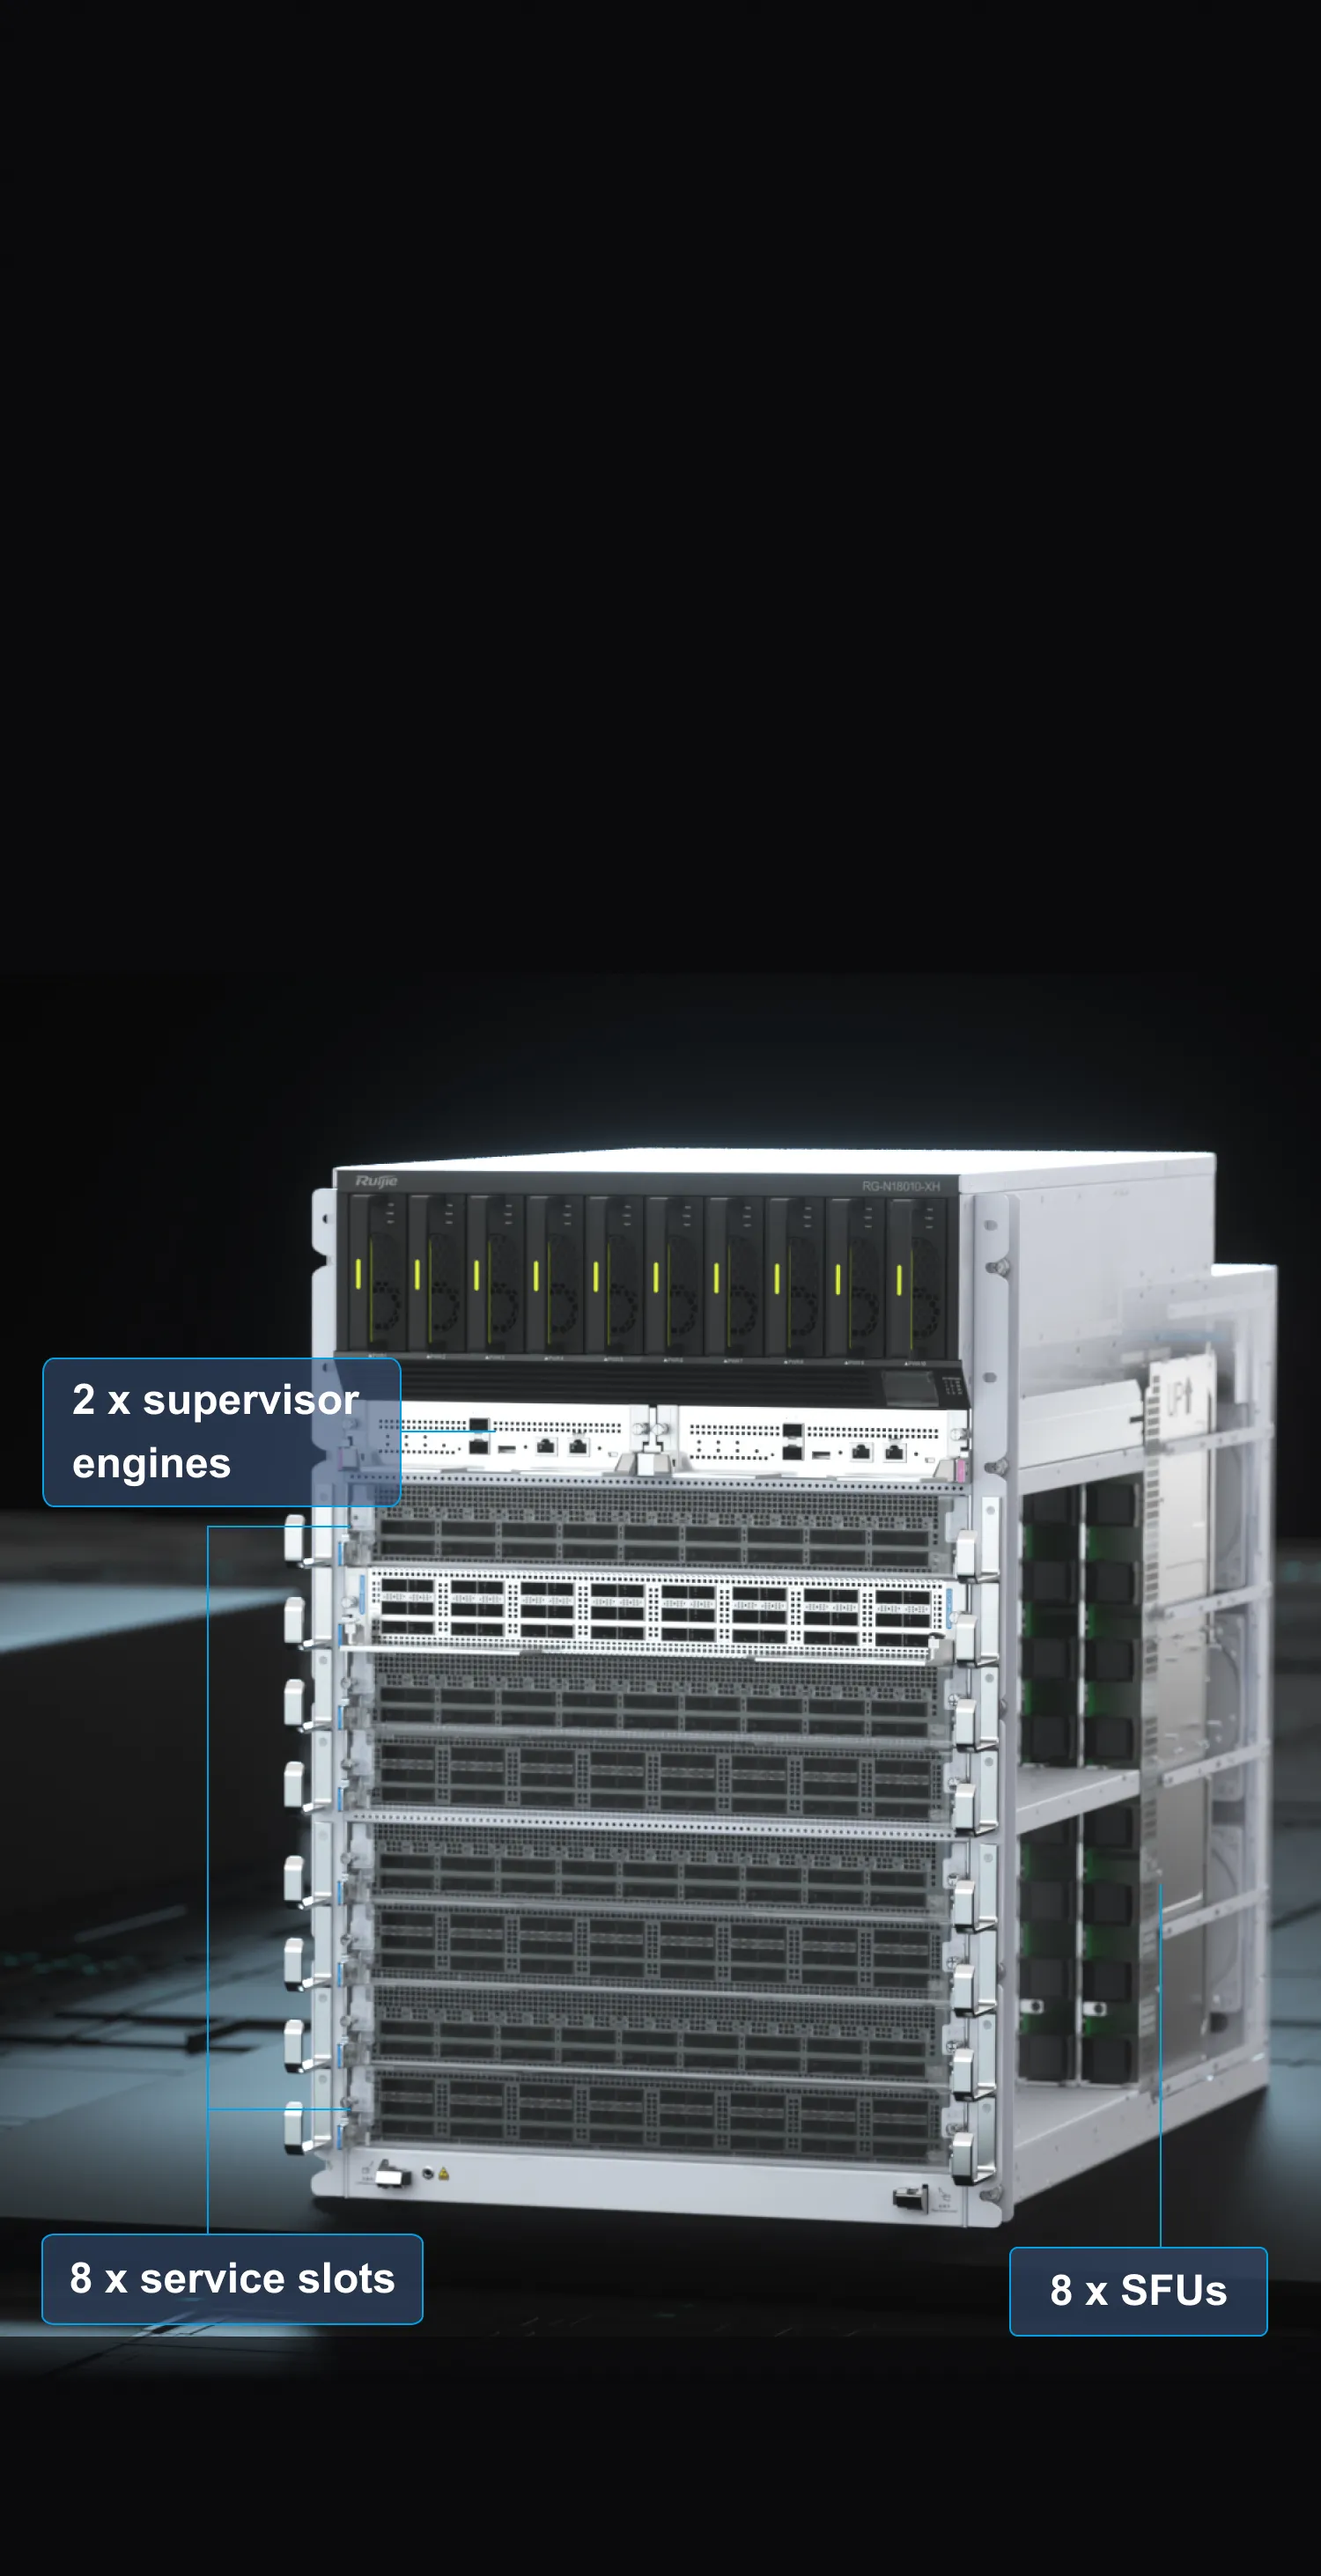 RG-N18010-XH – Next Generation Data Center Network High-Density Centralized  Modular Core Switch with 100GE/400GE Line Cards and Eight Service Slots -  Ruijie Networks